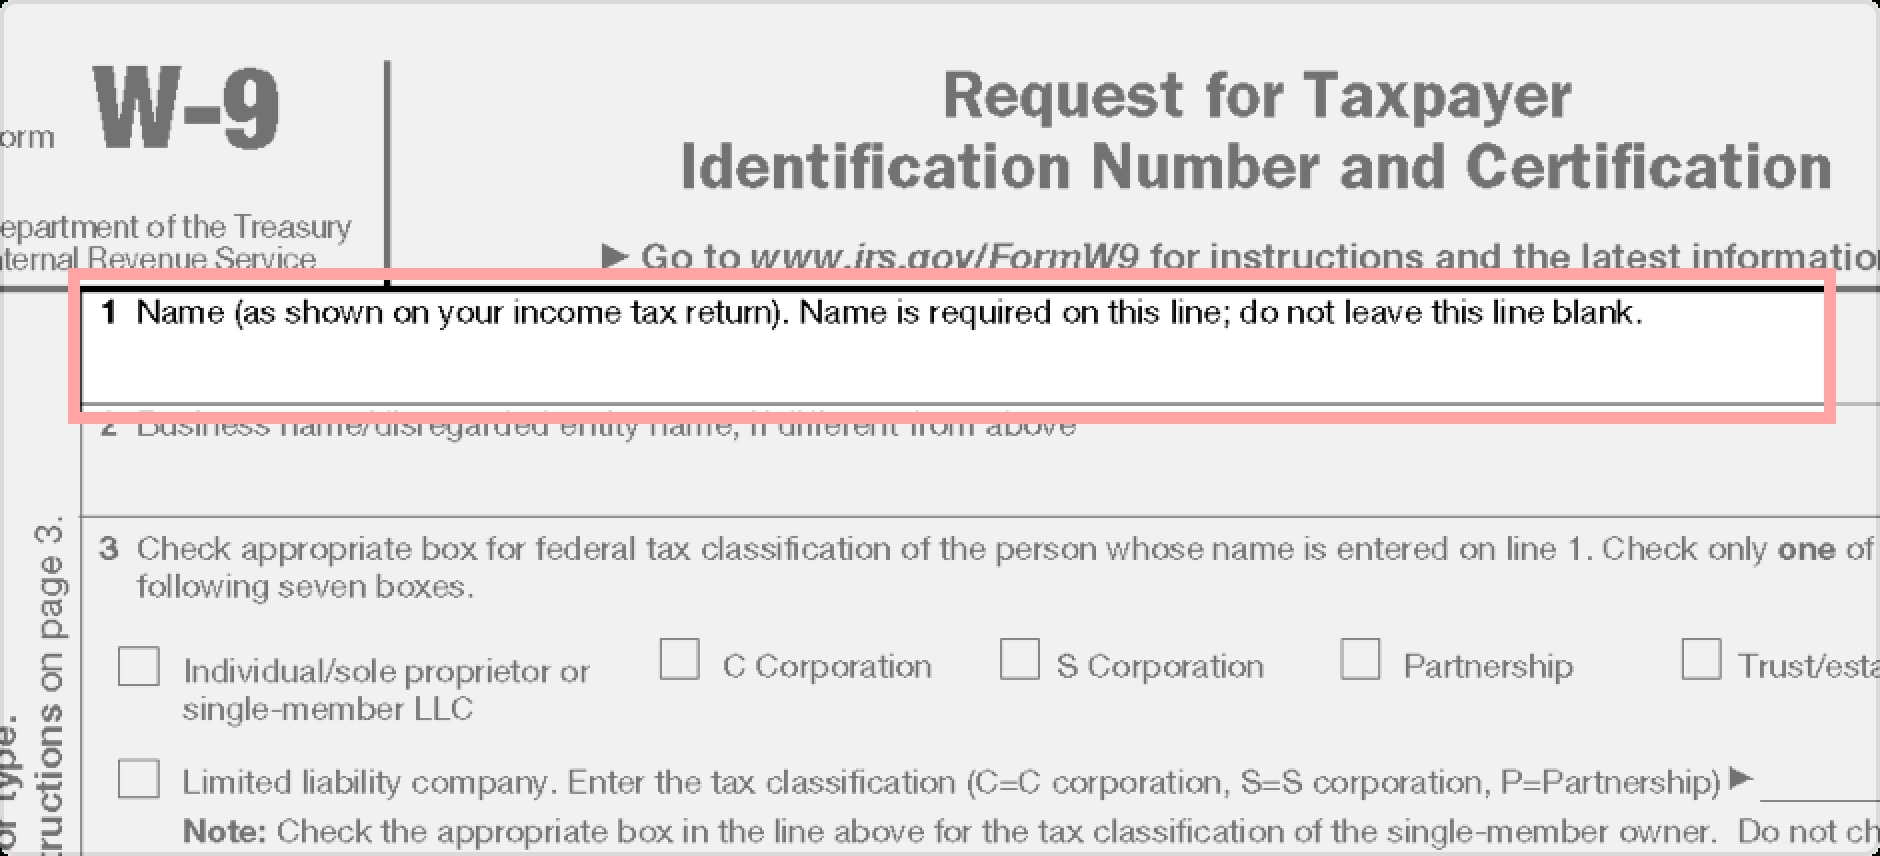 W-9 Form: Fillable, Printable, Download Free. 2019 Instructions-W-9 Tax Form Blank 2020